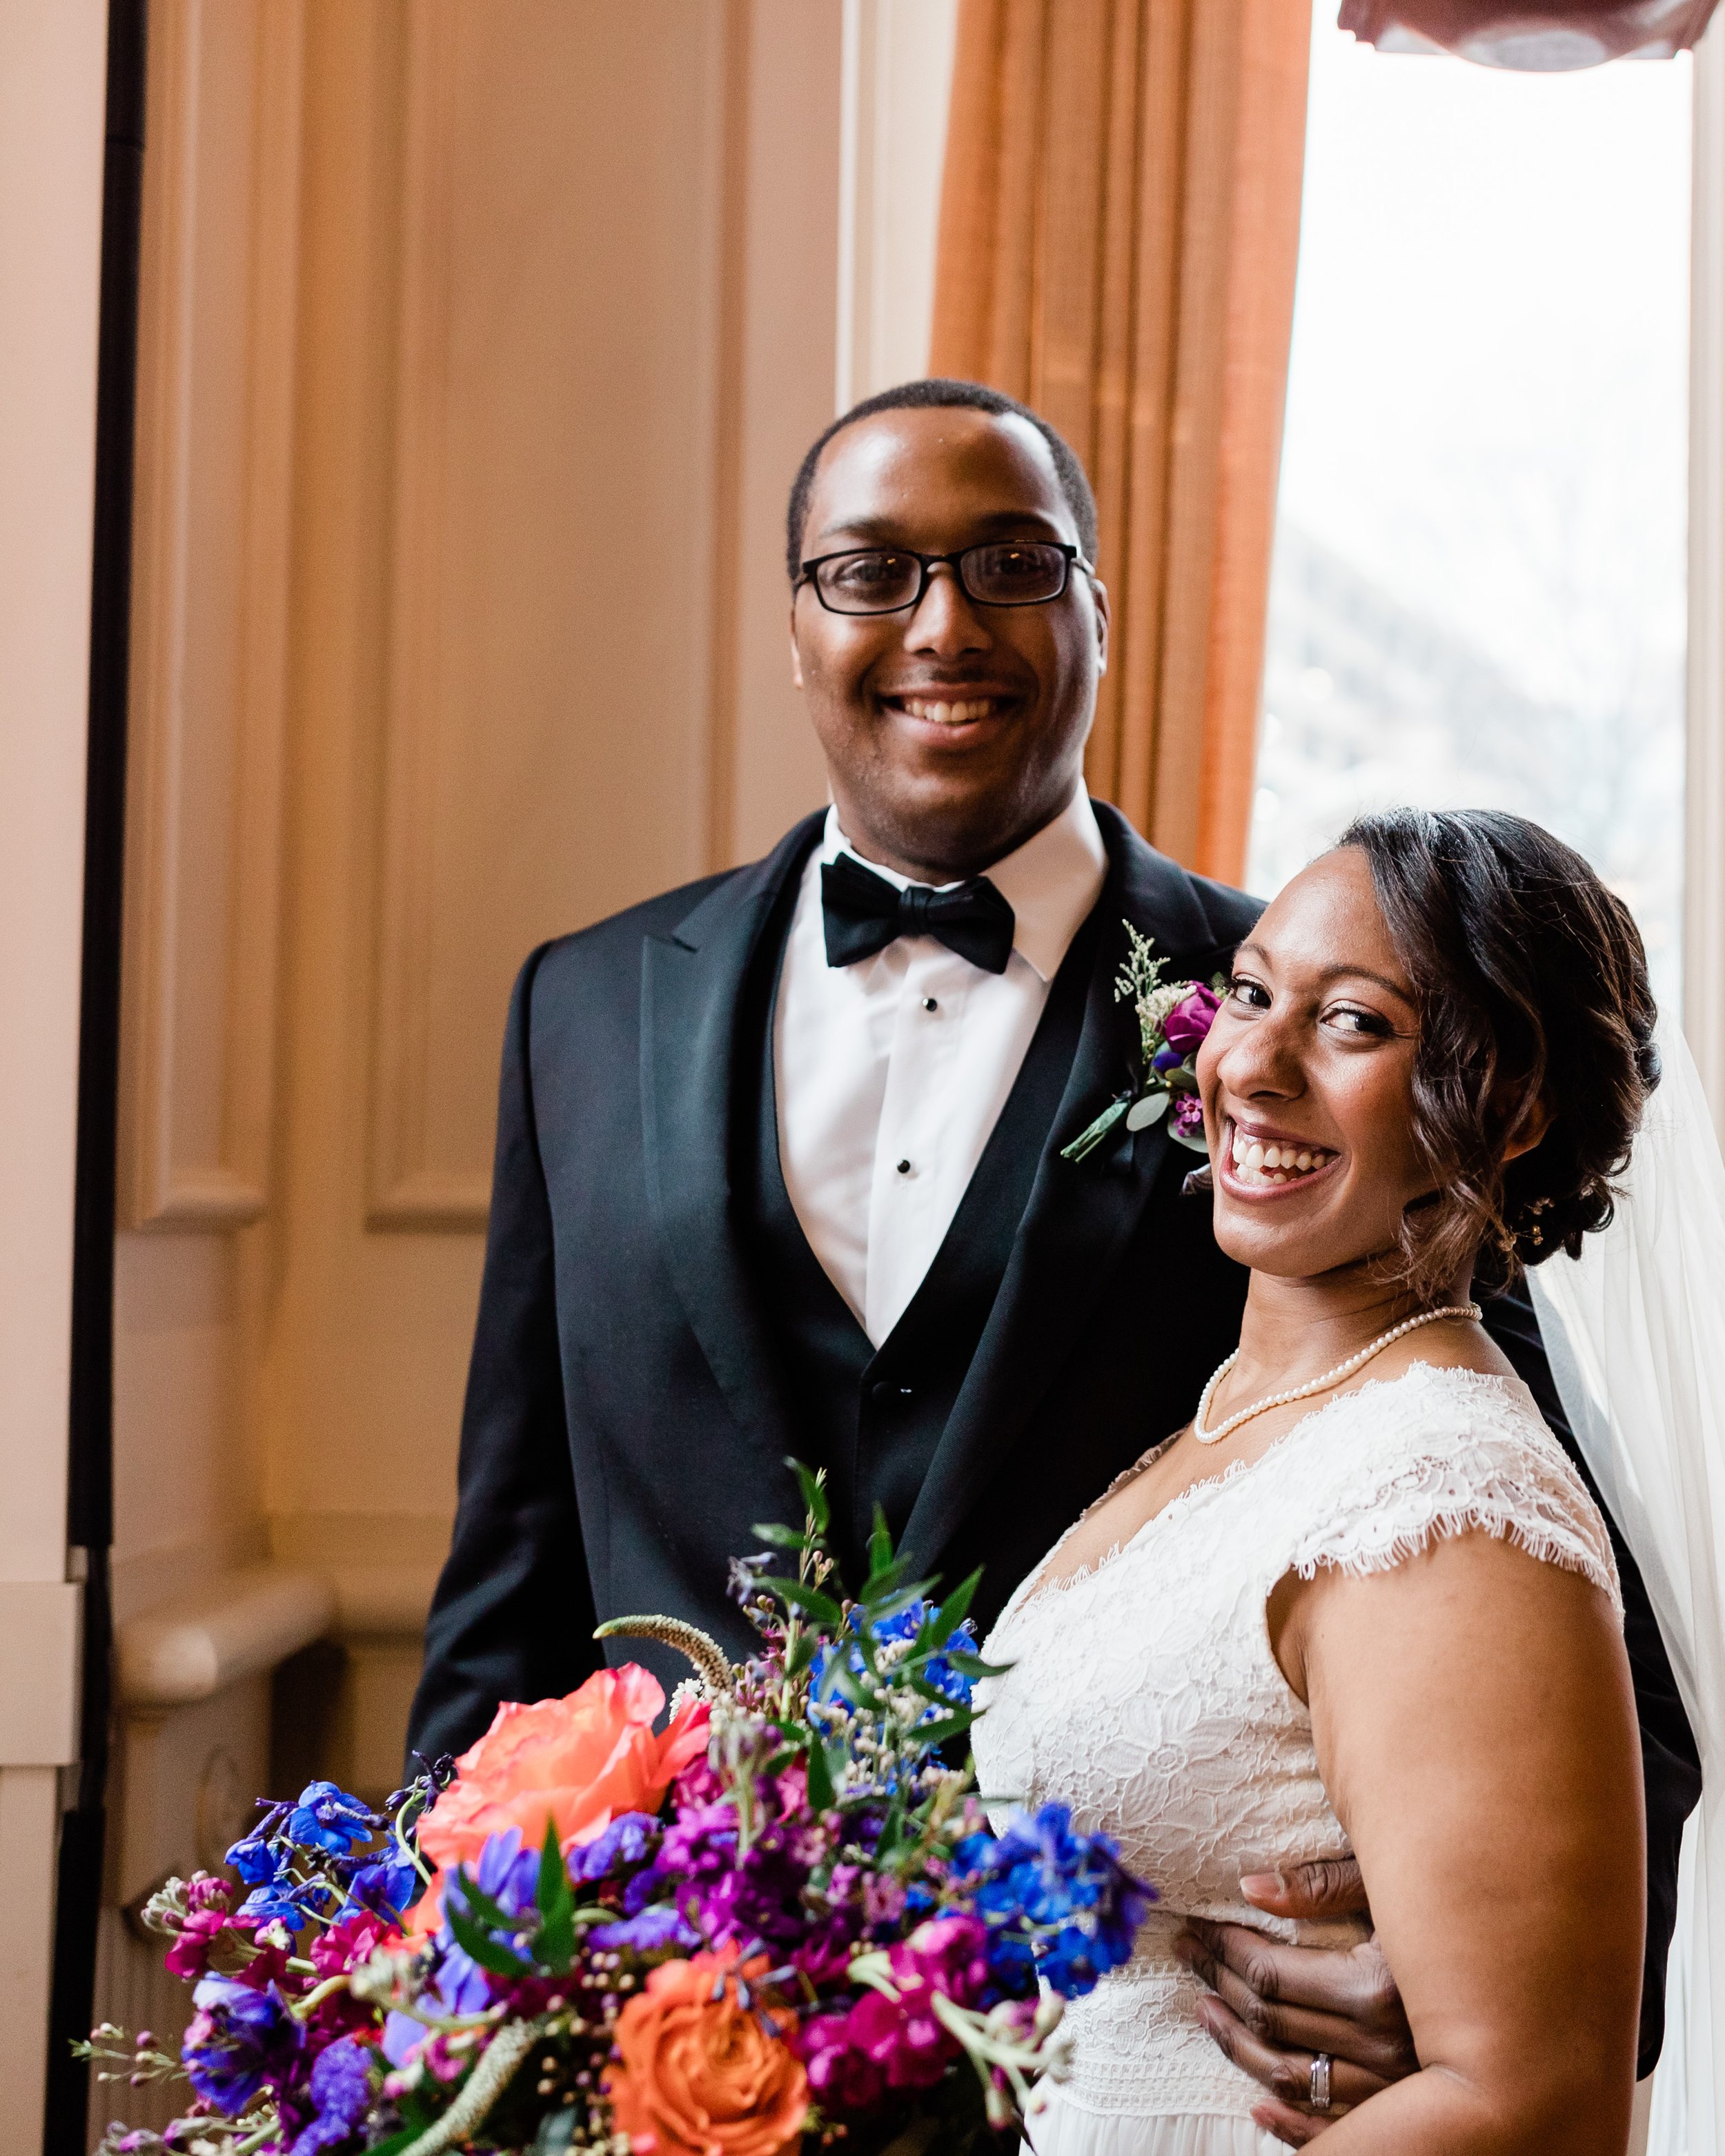 Snowy Winter Wedding at 1840's Plaza in Baltimore City Megapixels Media Photography-16.jpg